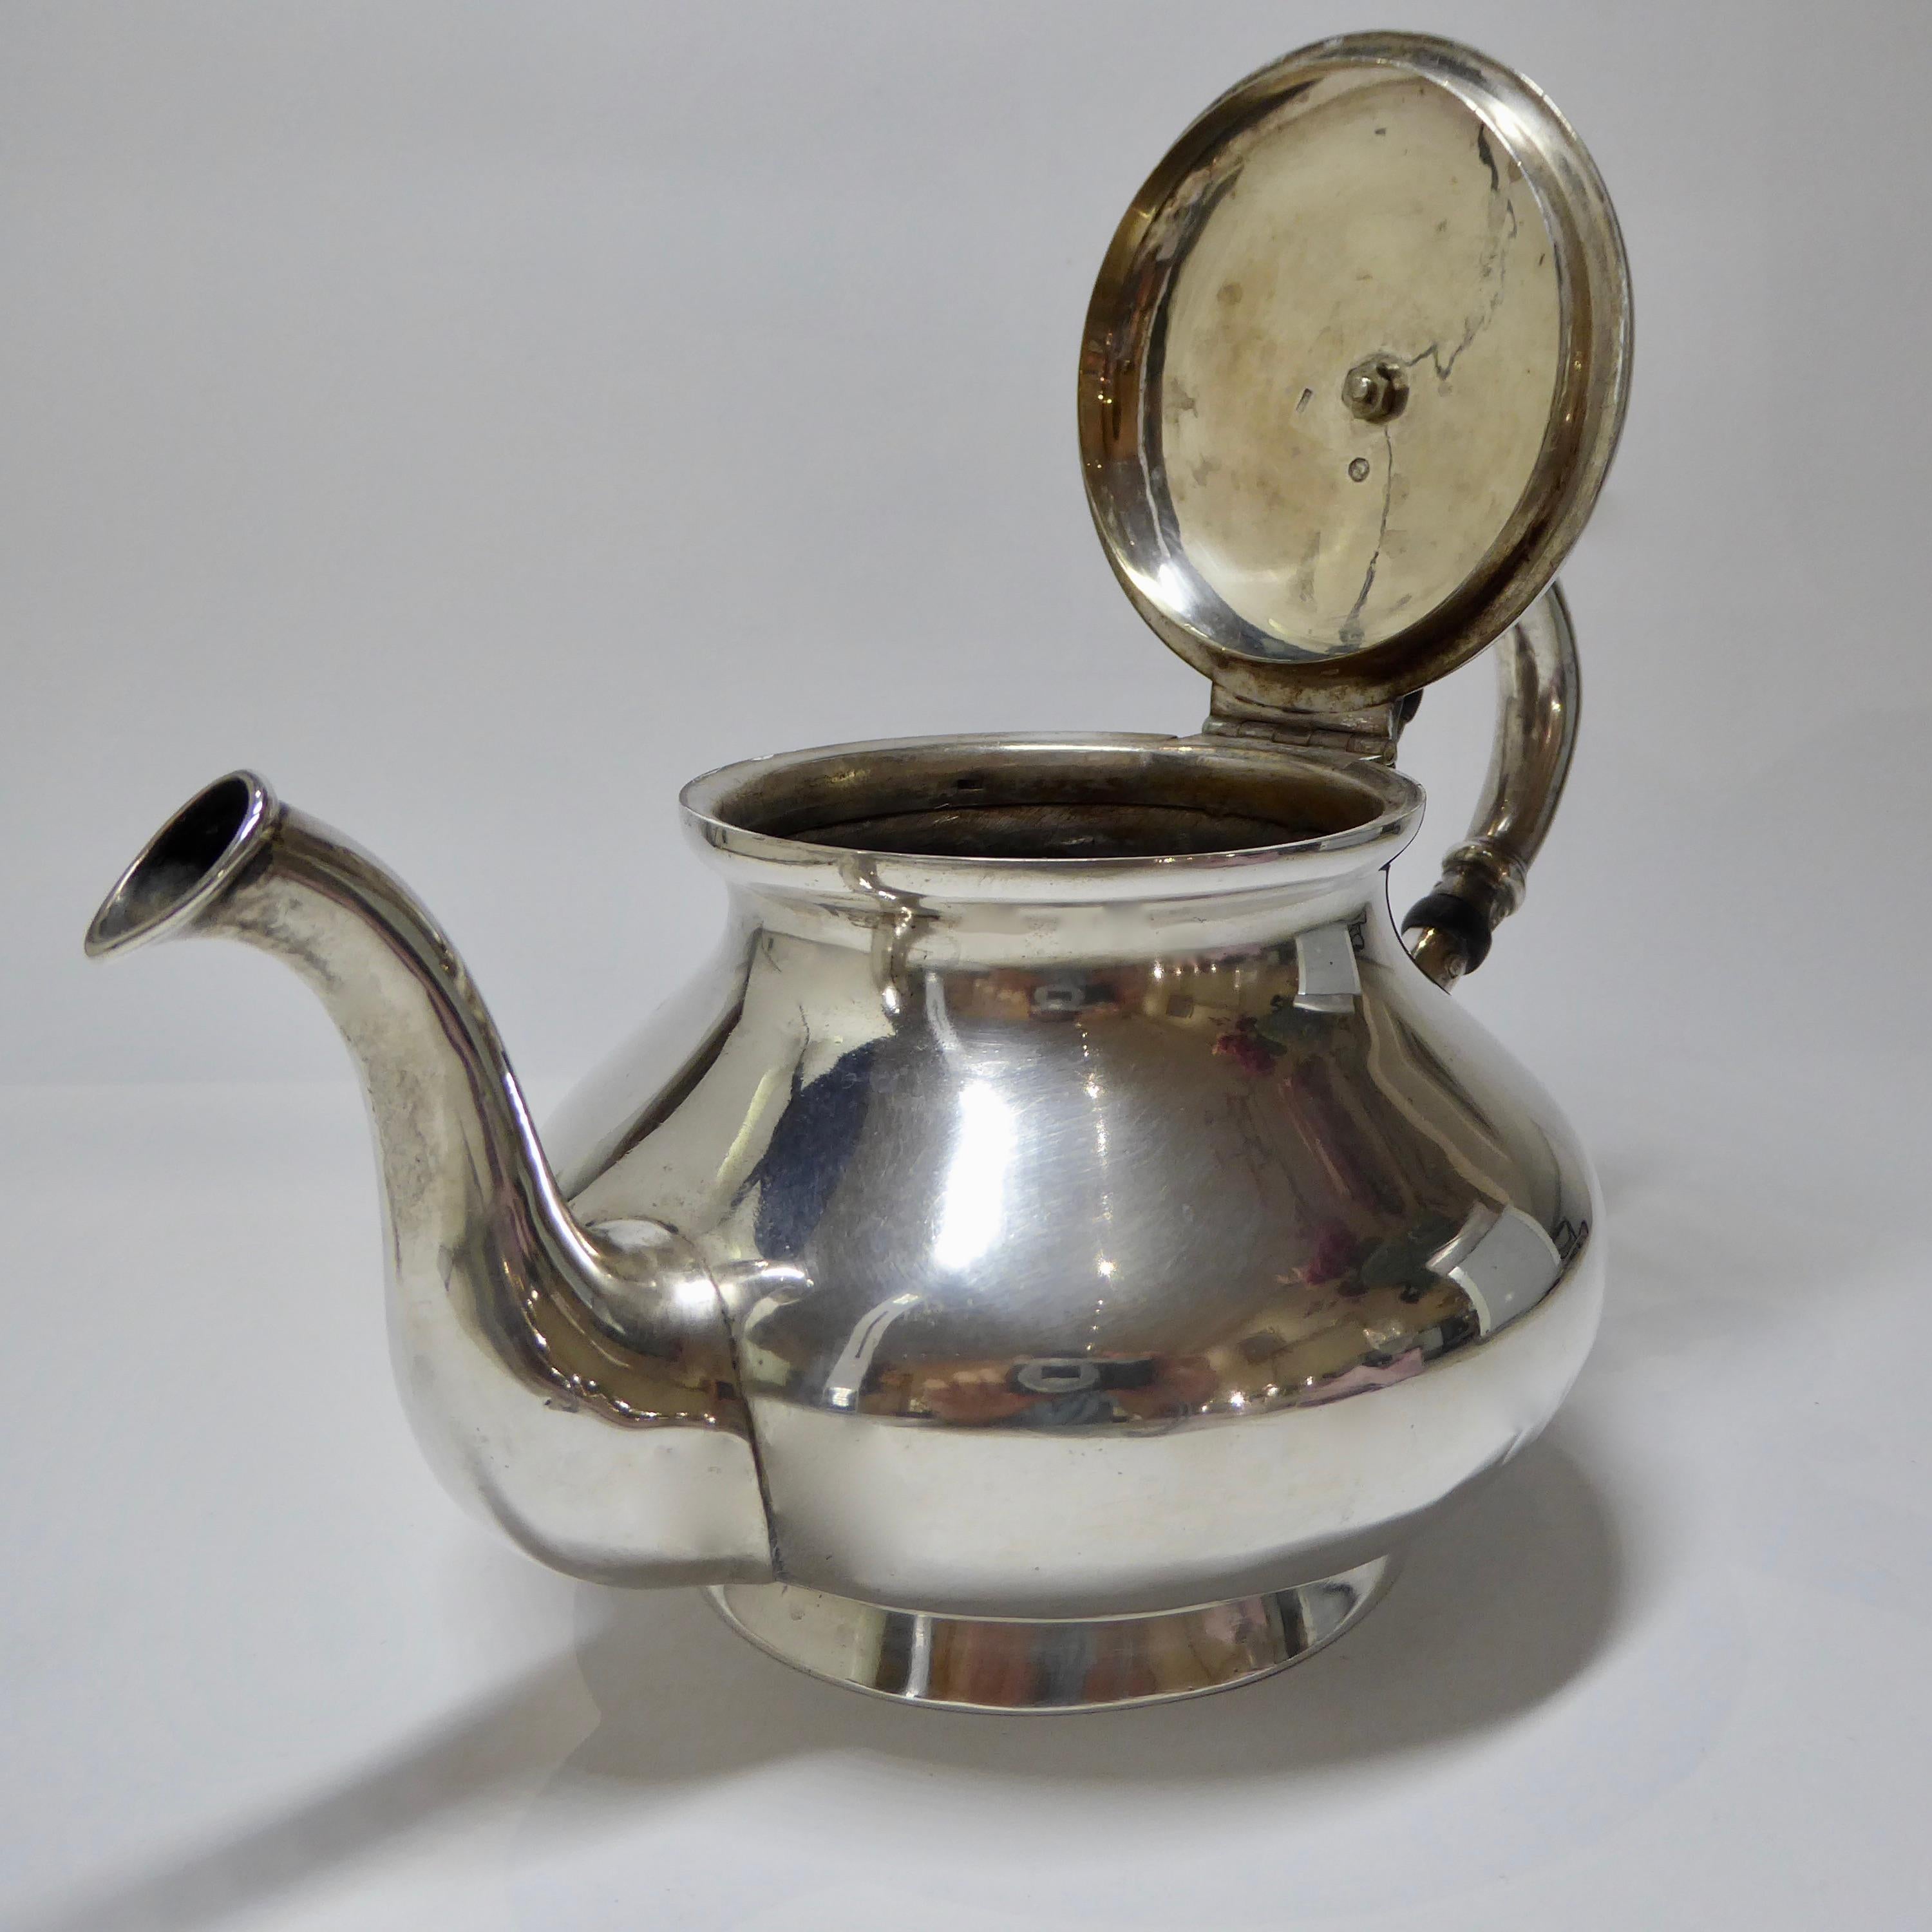 Beautiful, antique Dutch Tea pot, Made in 1870 by Johannes H. Balfoort Sr., Utrecht , The Netherlands.
J.H. Balfoort Sr. was well known in The Netherlands and worked in Utrecht from 1863 till 1883. The Tea Pot is in original condition and will serve